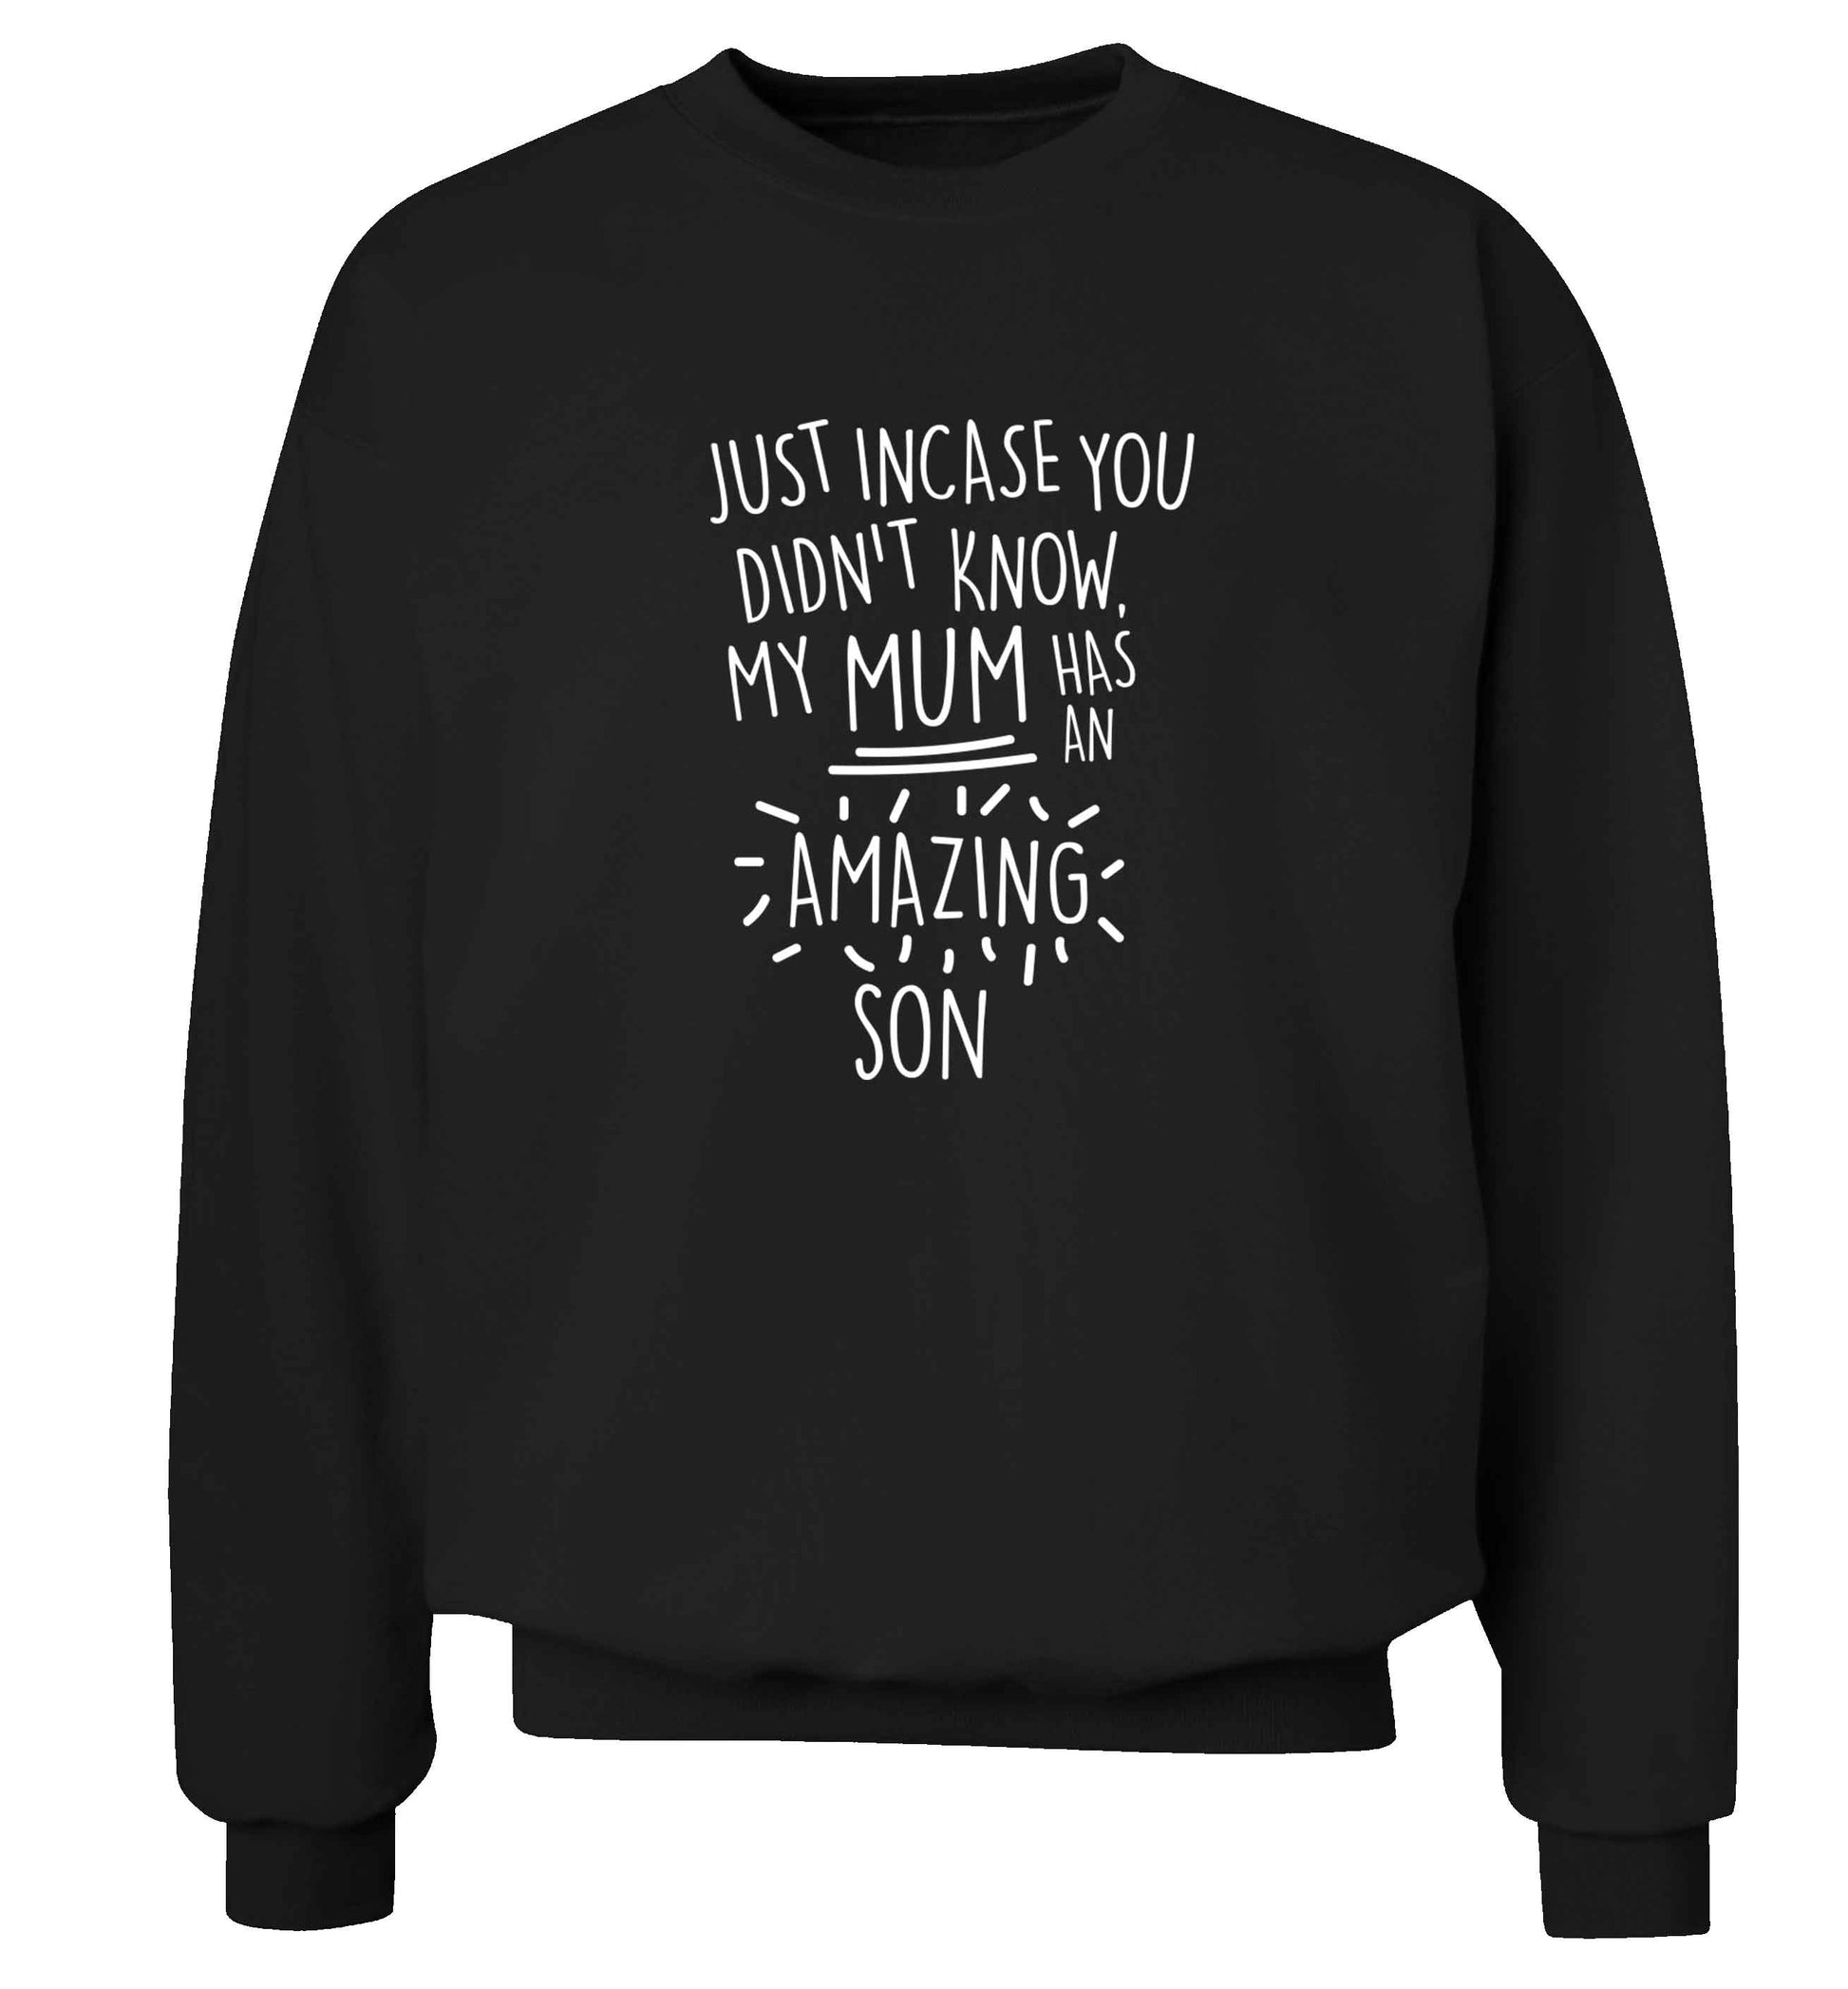 Just incase you didn't know my mum has an amazing son adult's unisex black sweater 2XL